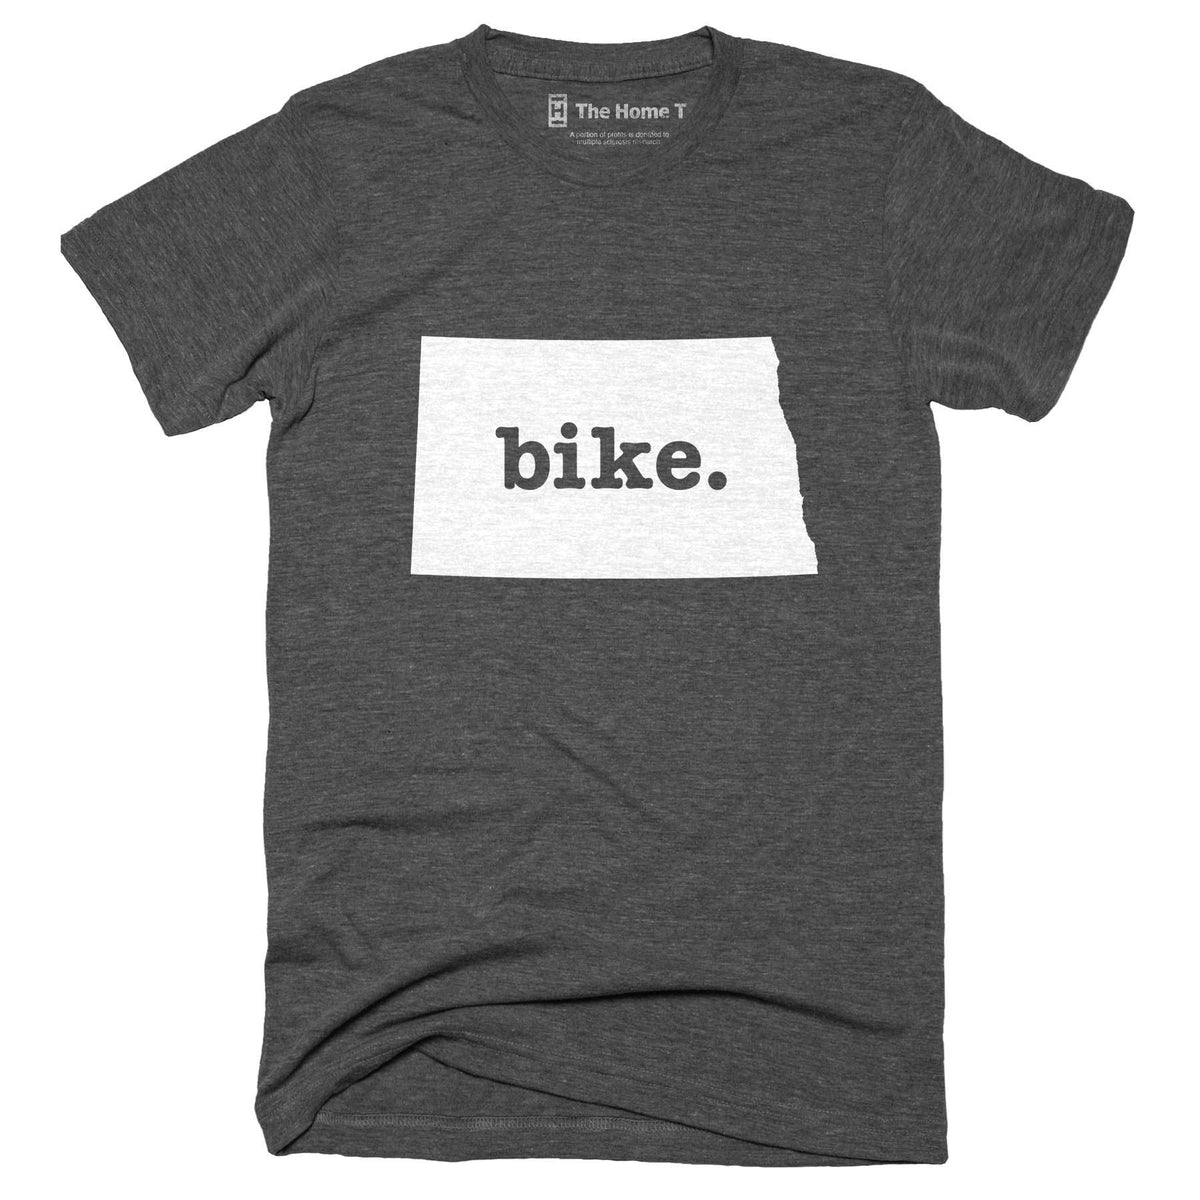 North Dakota Bike Home T-Shirt Outdoor Collection The Home T